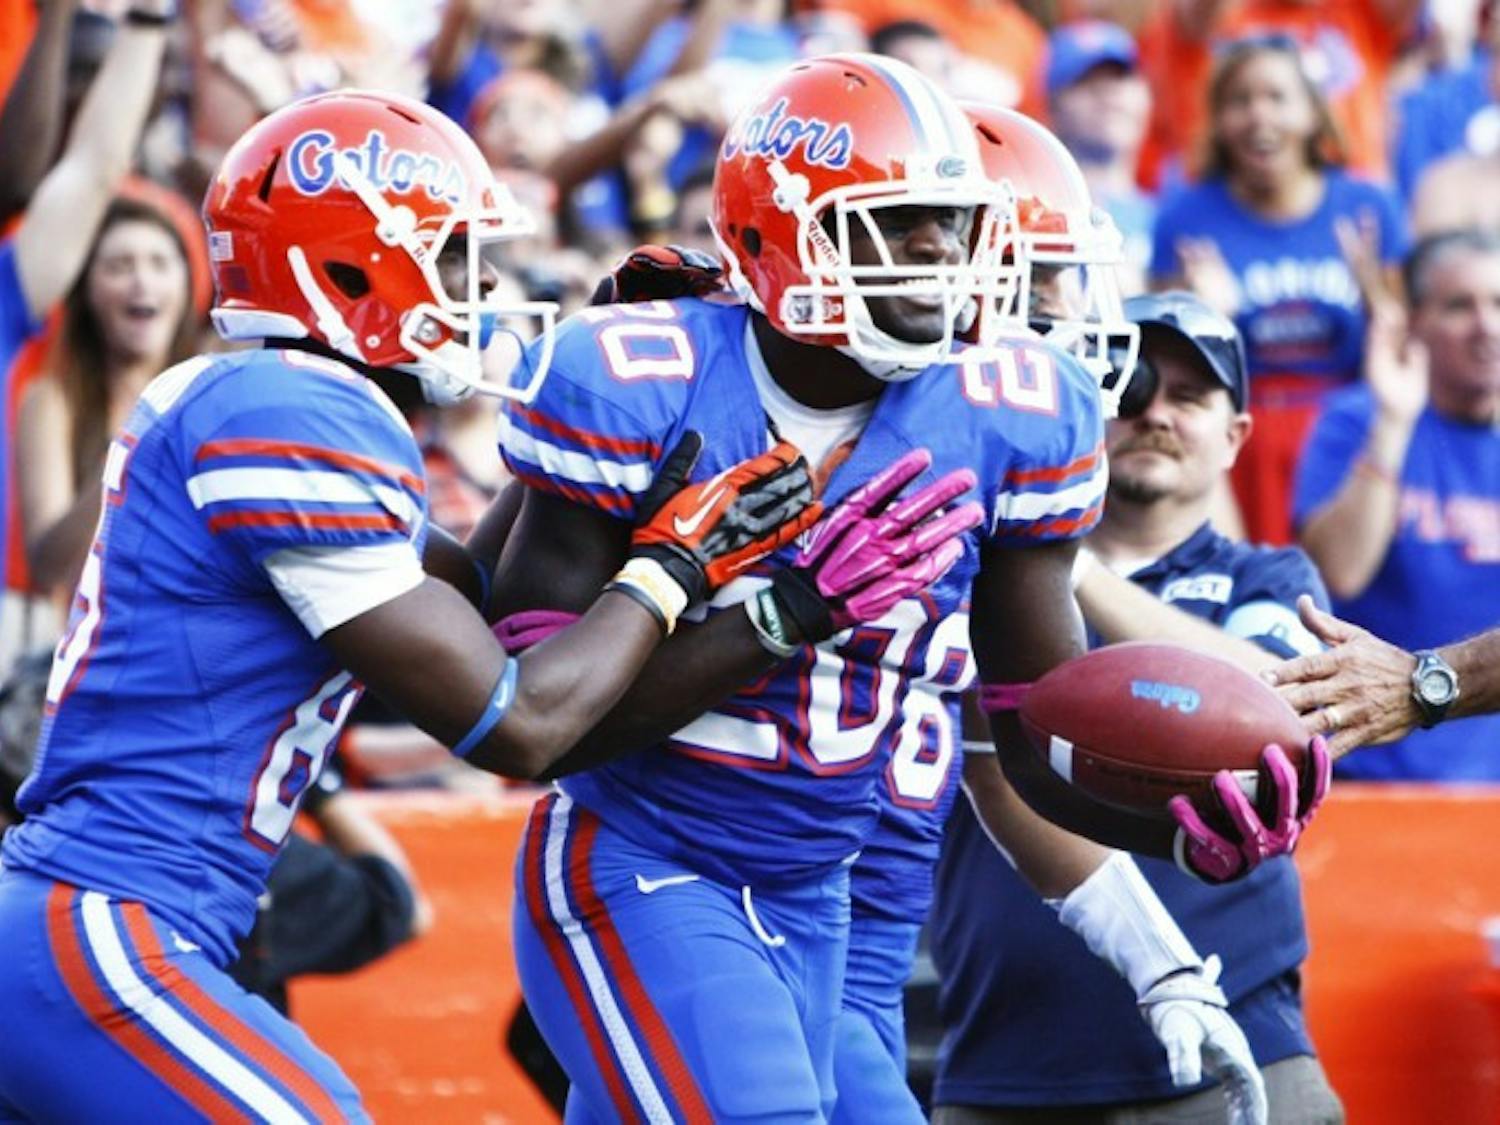 Omarius Hines (20) celebrates after making a one-handed touchdown catch that was called back in UF’s 44-11 win against South Carolina on Saturday.
